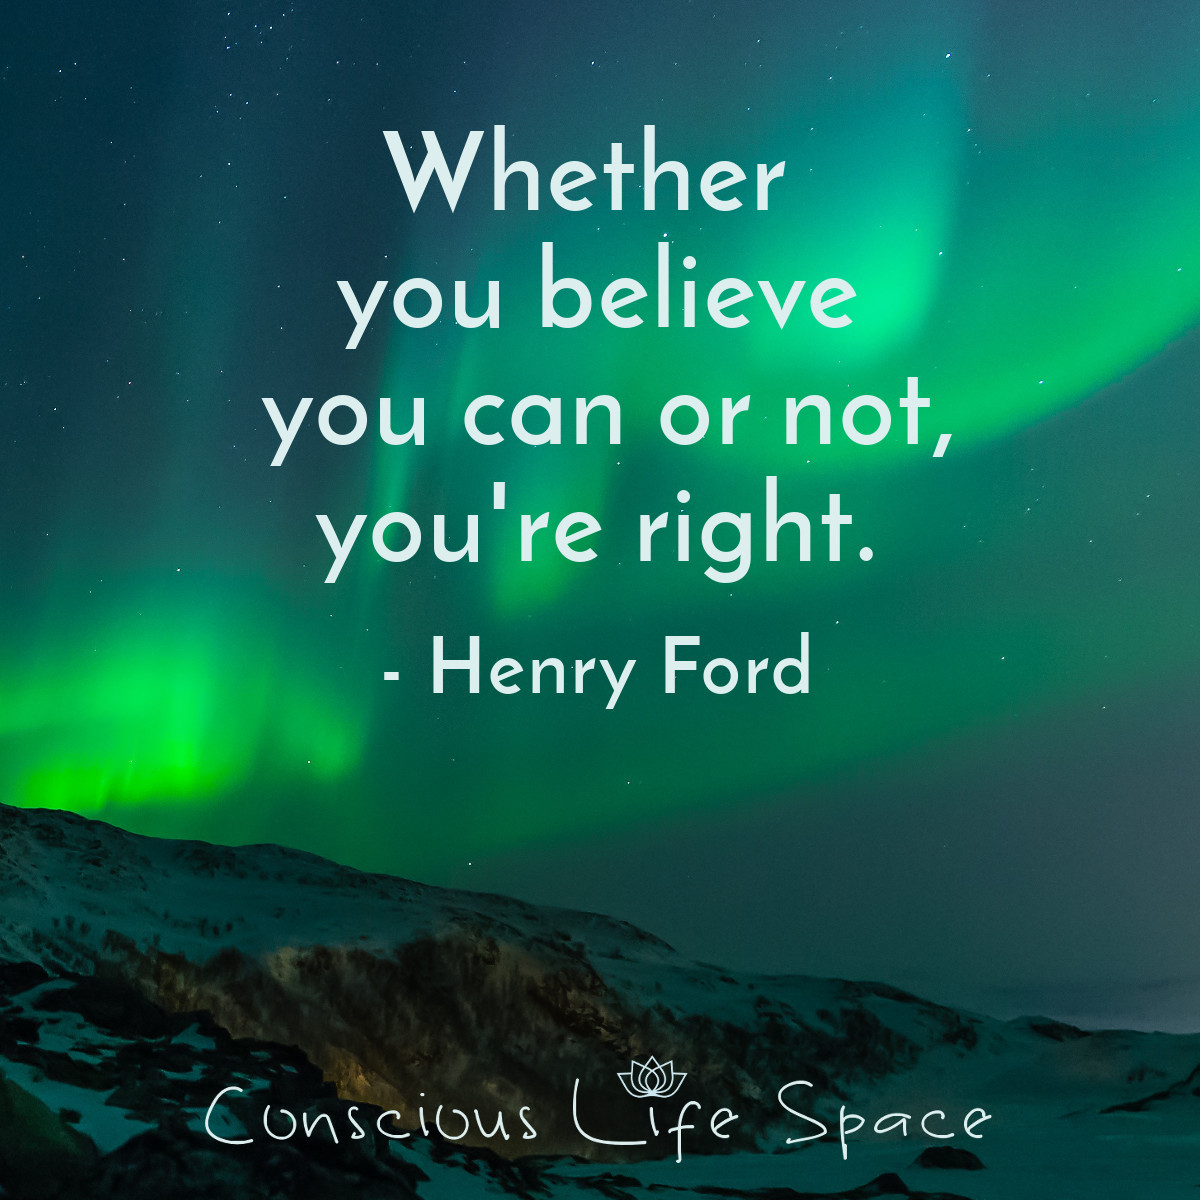 Whether you believe you can or not, you're right! - Henry Ford